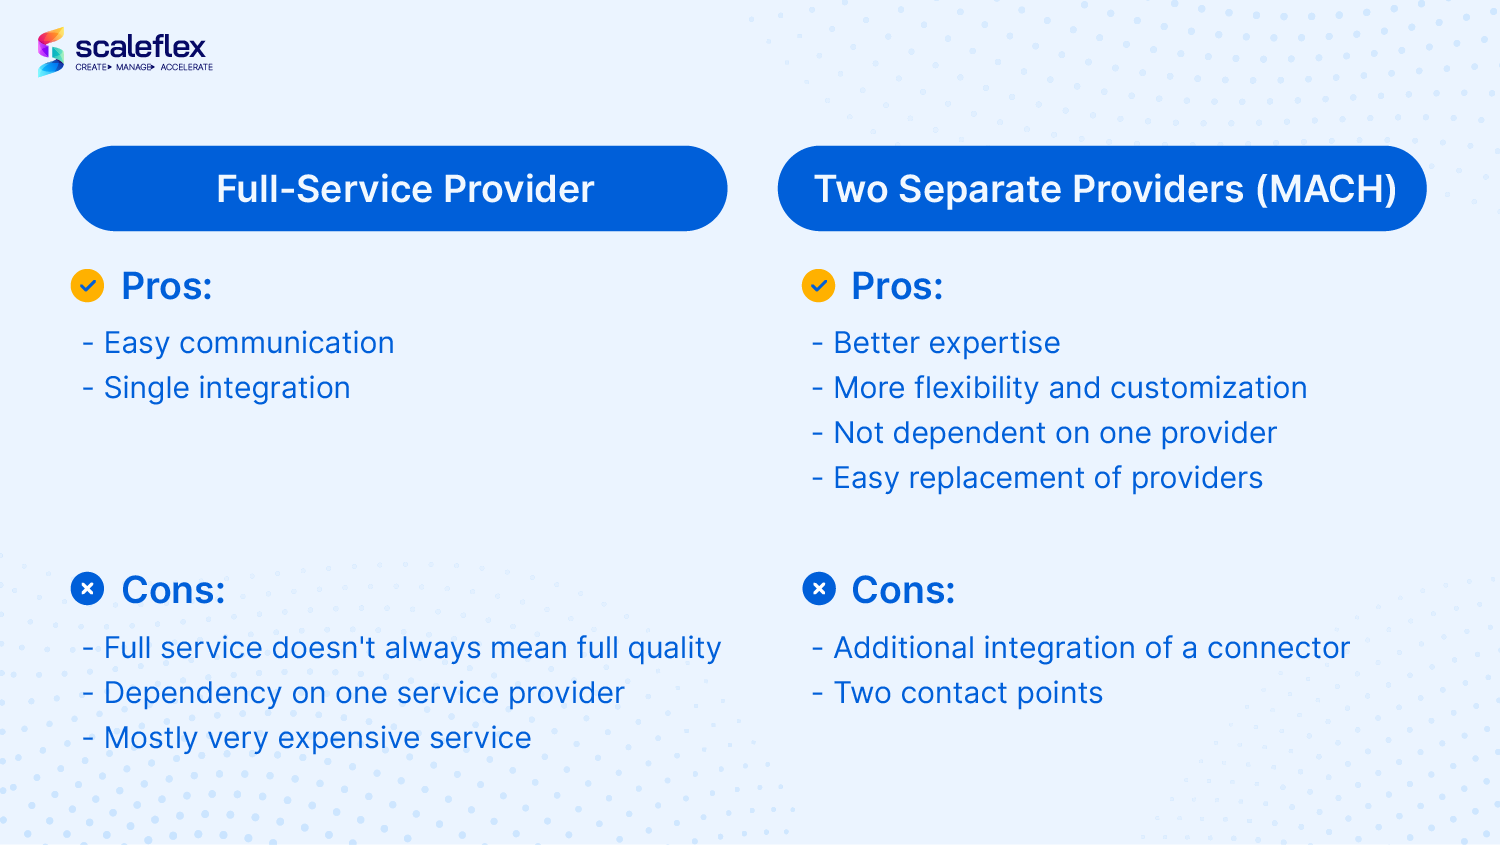 The pros and cons of DAM/PIM full-service provider and two separate providers